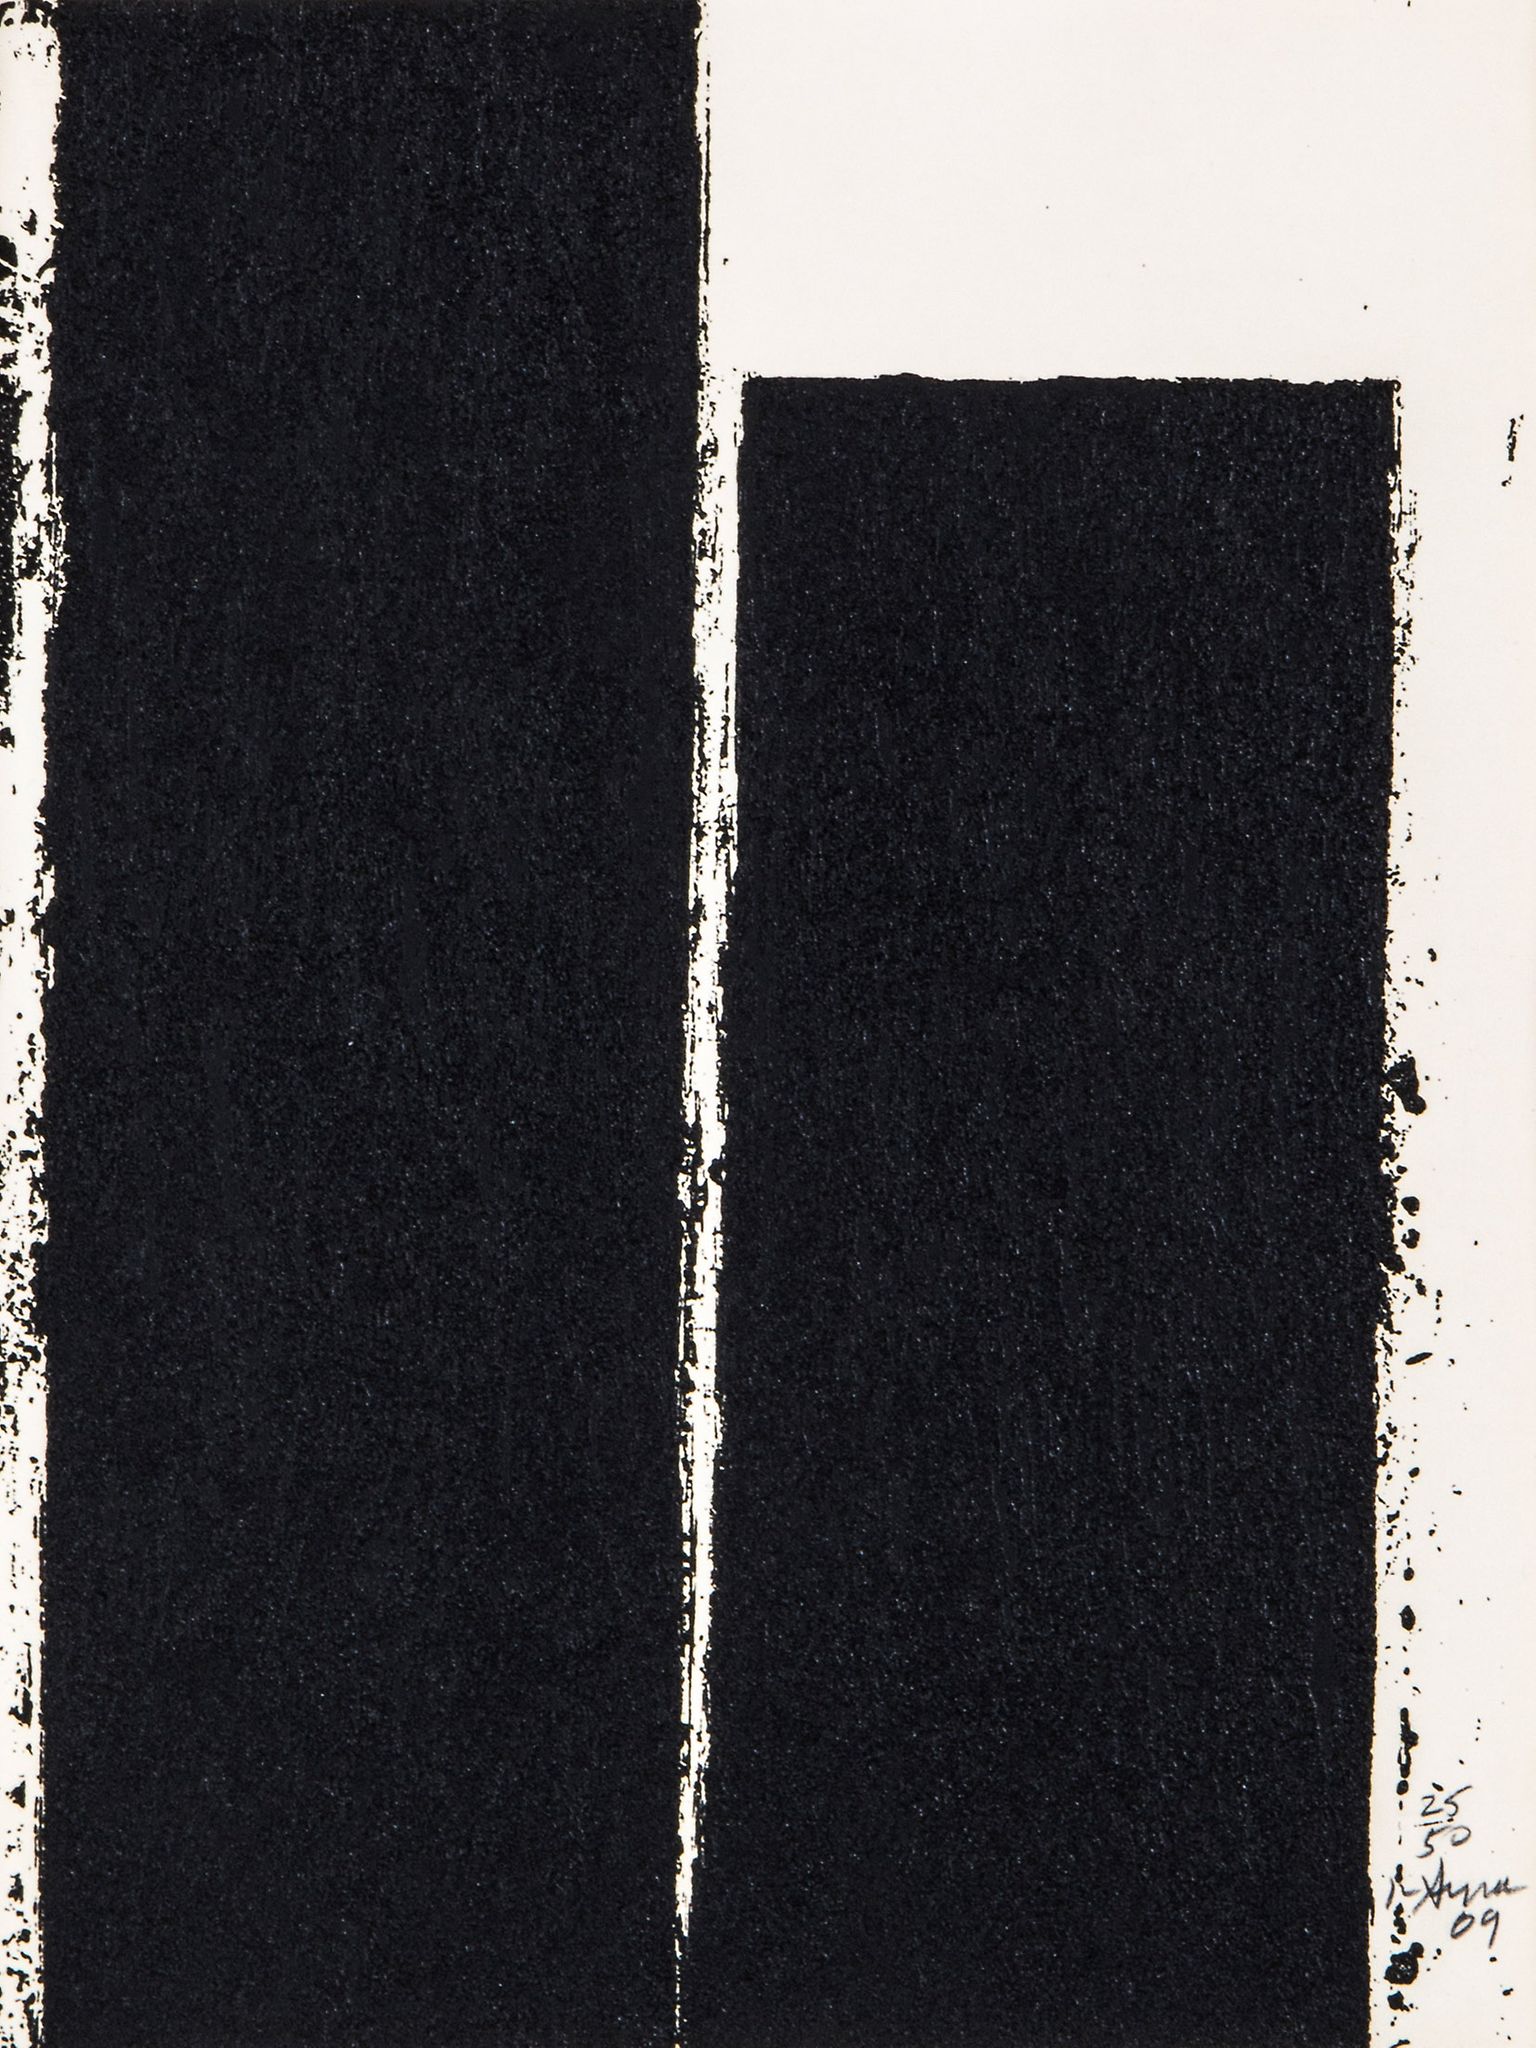 Richard Serra (b.1939) - Promenade Notebook Drawing the set of five etchings, 2009, each signed - Image 2 of 5